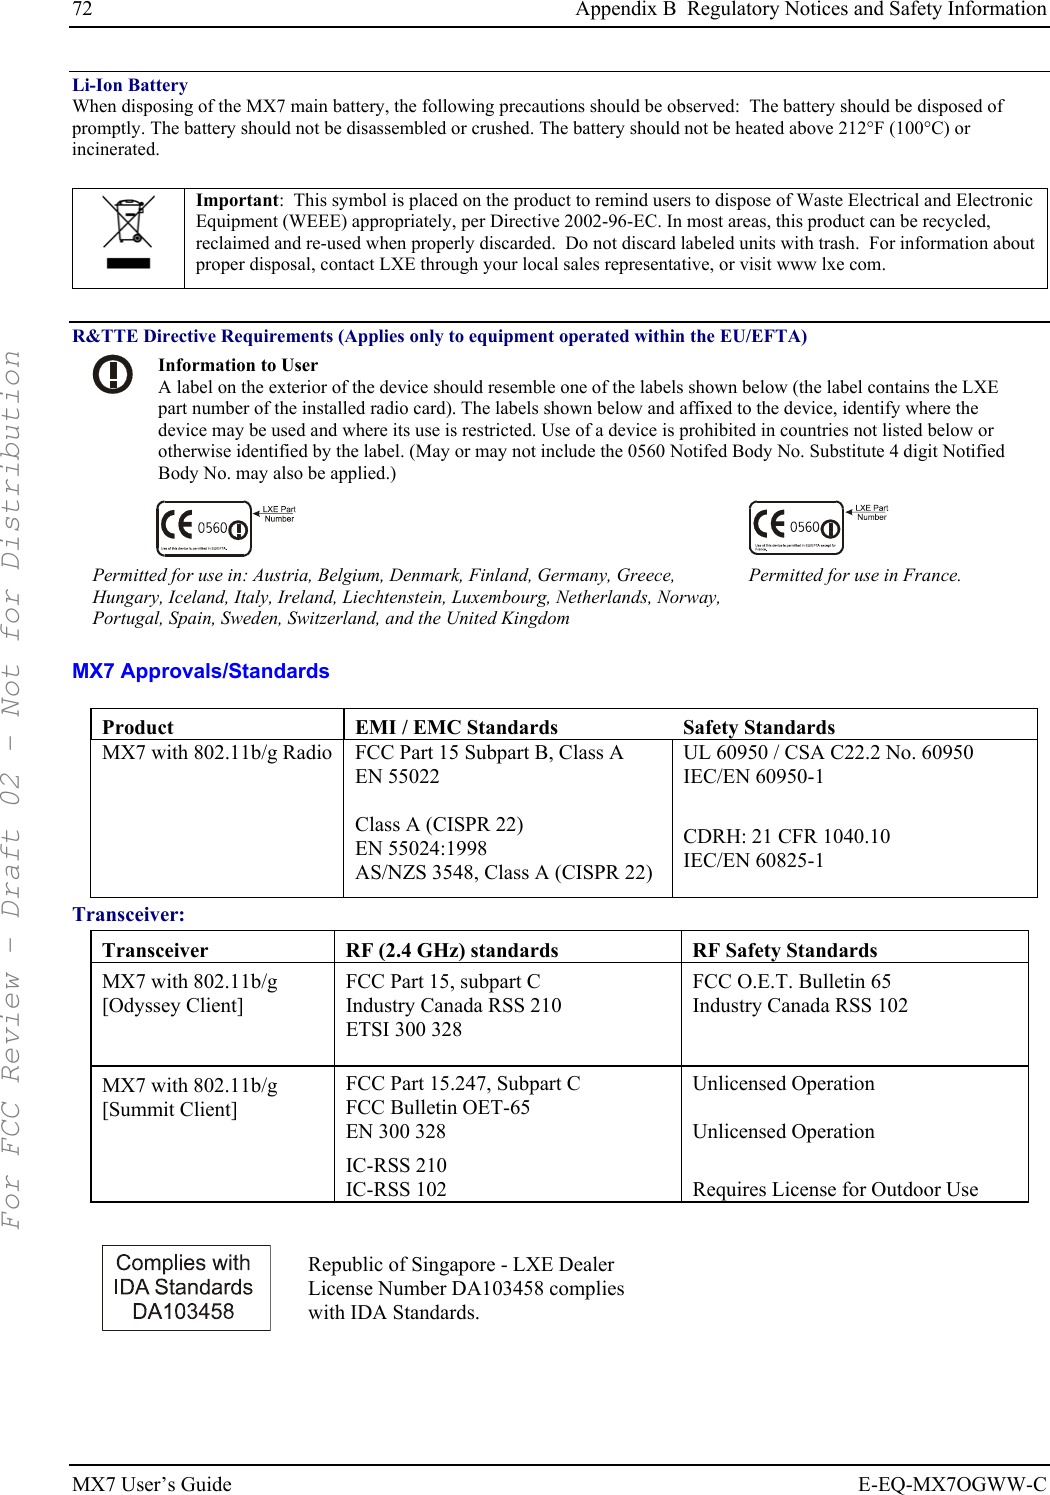 72  Appendix B  Regulatory Notices and Safety Information MX7 User’s Guide  E-EQ-MX7OGWW-C Li-Ion Battery When disposing of the MX7 main battery, the following precautions should be observed:  The battery should be disposed of promptly. The battery should not be disassembled or crushed. The battery should not be heated above 212°F (100°C) or incinerated.   Important:  This symbol is placed on the product to remind users to dispose of Waste Electrical and Electronic Equipment (WEEE) appropriately, per Directive 2002-96-EC. In most areas, this product can be recycled, reclaimed and re-used when properly discarded.  Do not discard labeled units with trash.  For information about proper disposal, contact LXE through your local sales representative, or visit www lxe com.  R&amp;TTE Directive Requirements (Applies only to equipment operated within the EU/EFTA)  Information to User A label on the exterior of the device should resemble one of the labels shown below (the label contains the LXE part number of the installed radio card). The labels shown below and affixed to the device, identify where the device may be used and where its use is restricted. Use of a device is prohibited in countries not listed below or otherwise identified by the label. (May or may not include the 0560 Notifed Body No. Substitute 4 digit Notified Body No. may also be applied.)   Permitted for use in: Austria, Belgium, Denmark, Finland, Germany, Greece, Hungary, Iceland, Italy, Ireland, Liechtenstein, Luxembourg, Netherlands, Norway, Portugal, Spain, Sweden, Switzerland, and the United Kingdom Permitted for use in France. MX7 Approvals/Standards  Product  EMI / EMC Standards   Safety Standards MX7 with 802.11b/g Radio   FCC Part 15 Subpart B, Class A EN 55022  Class A (CISPR 22) EN 55024:1998 AS/NZS 3548, Class A (CISPR 22) UL 60950 / CSA C22.2 No. 60950 IEC/EN 60950-1  CDRH: 21 CFR 1040.10 IEC/EN 60825-1 Transceiver: Transceiver  RF (2.4 GHz) standards  RF Safety Standards MX7 with 802.11b/g [Odyssey Client] FCC Part 15, subpart C Industry Canada RSS 210 ETSI 300 328  FCC O.E.T. Bulletin 65 Industry Canada RSS 102 MX7 with 802.11b/g [Summit Client] FCC Part 15.247, Subpart C FCC Bulletin OET-65 EN 300 328 IC-RSS 210 IC-RSS 102 Unlicensed Operation  Unlicensed Operation  Requires License for Outdoor Use   Republic of Singapore - LXE Dealer License Number DA103458 complies with IDA Standards.  For FCC Review - Draft 02 - Not for Distribution